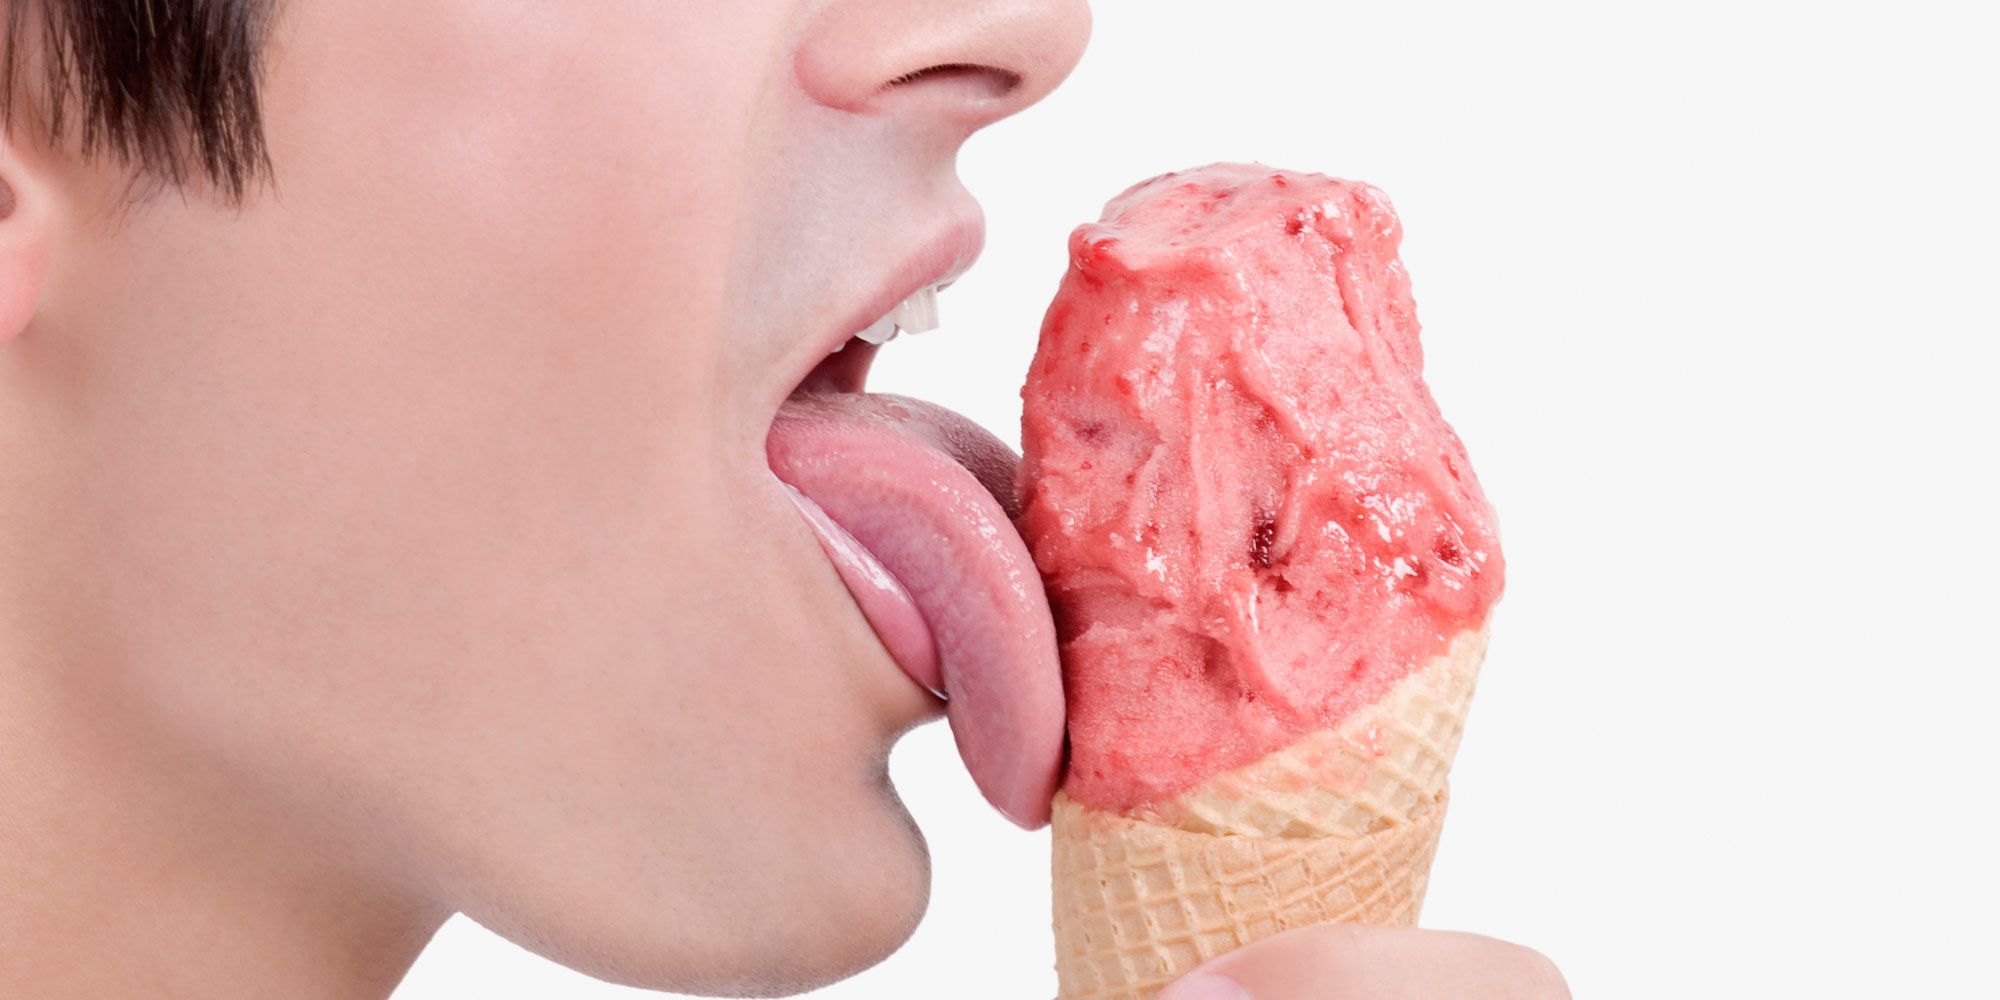 12 Things Women Wish Guys Knew About Oral pic